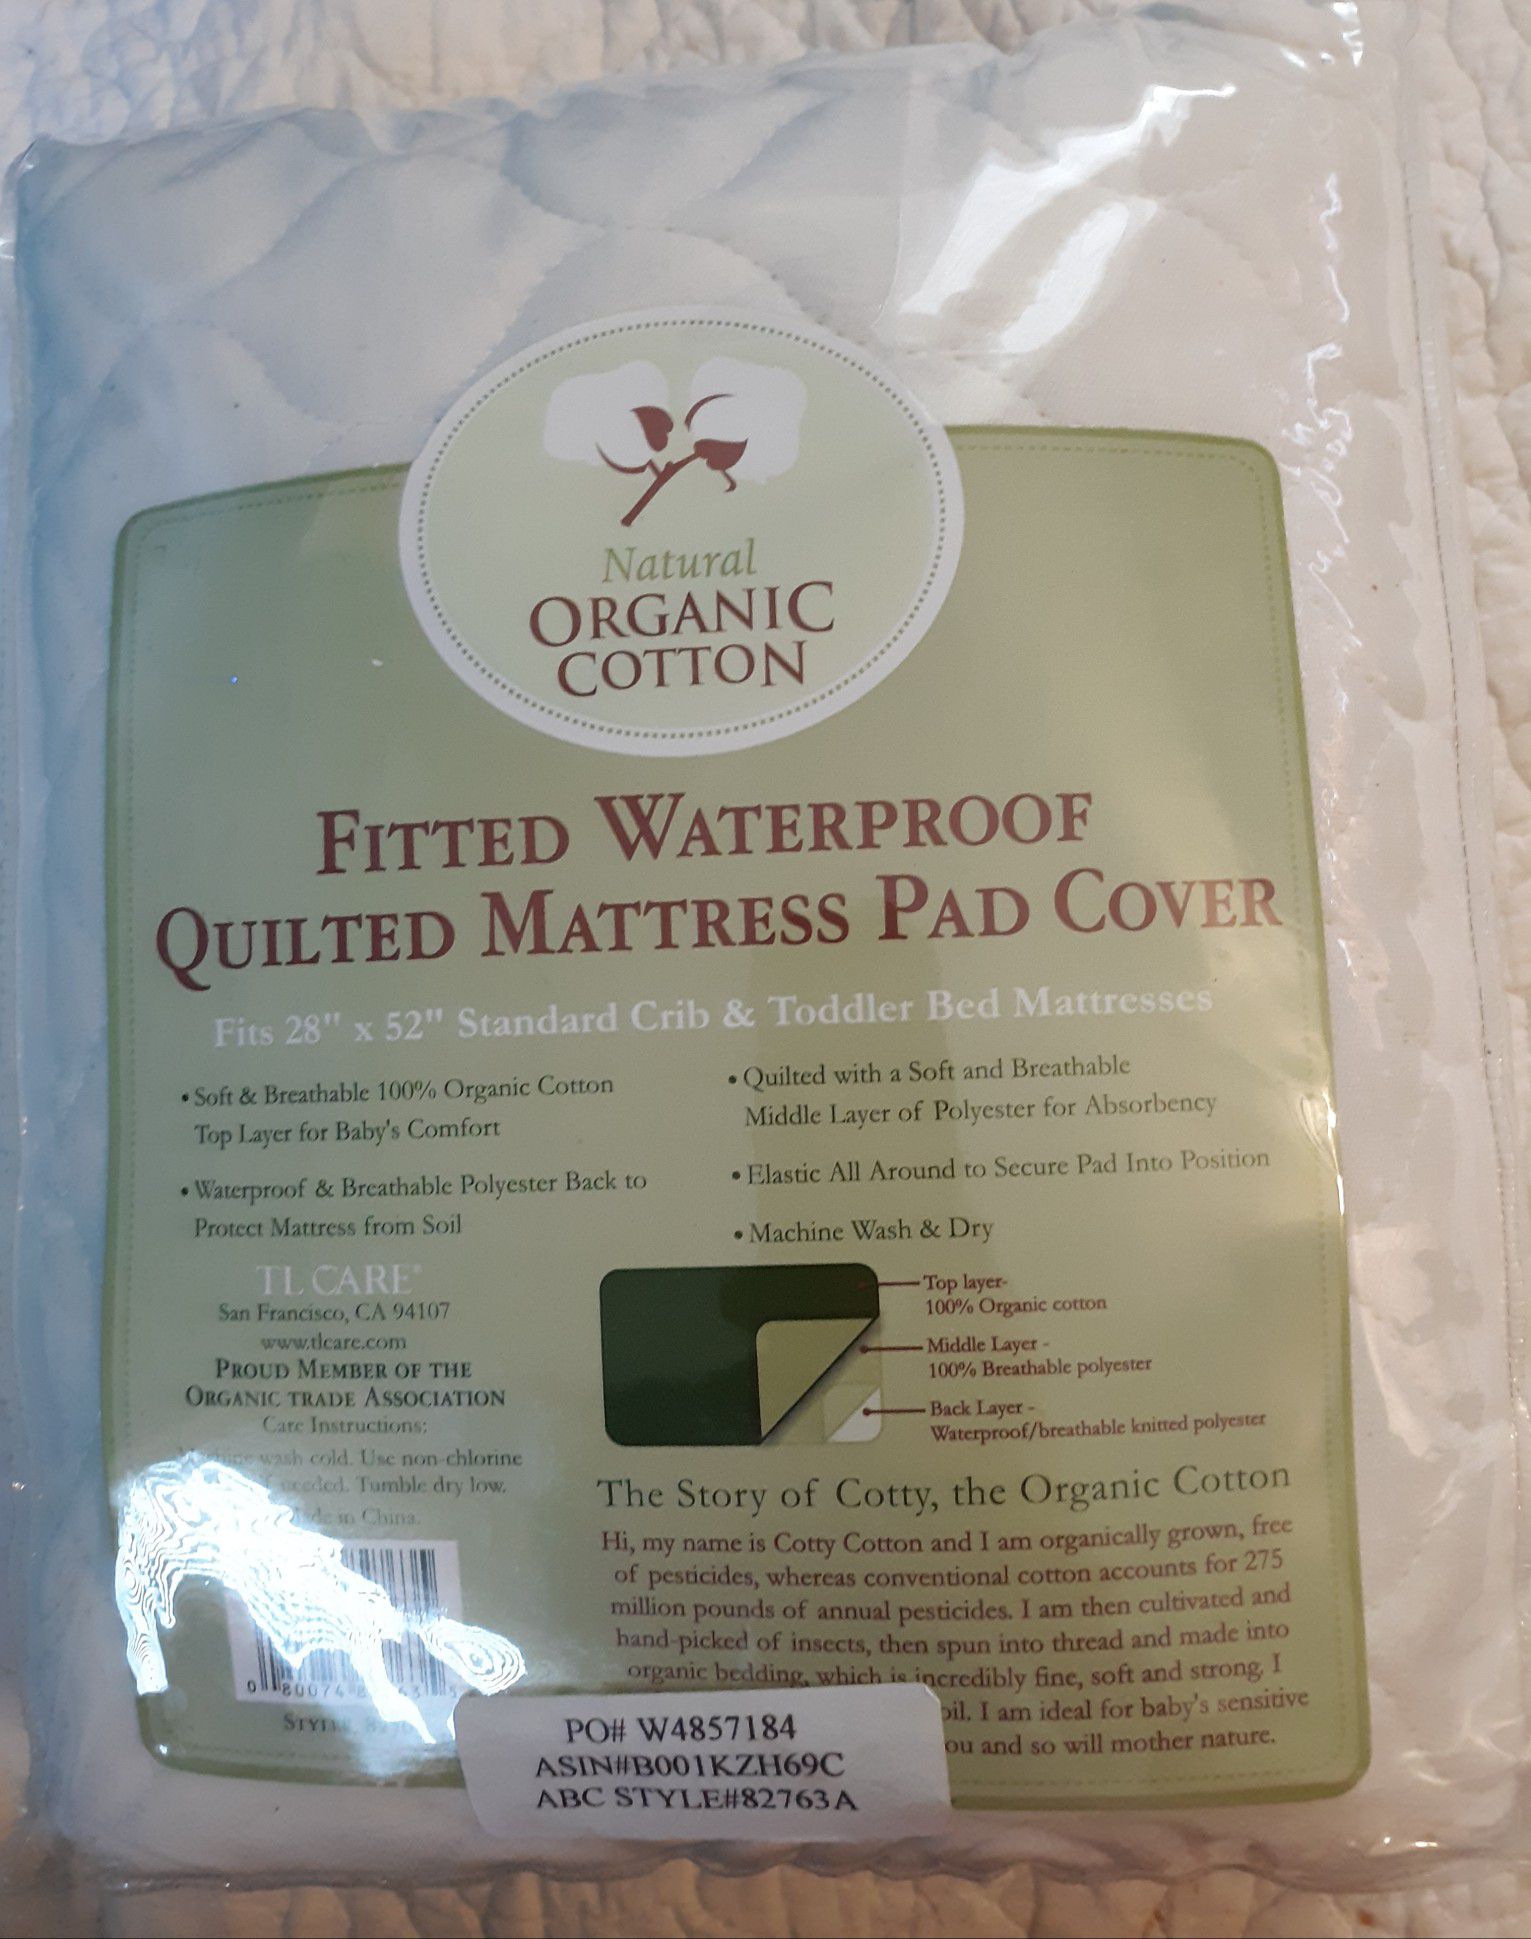 Organic Cotton Fitted Waterproof Quilted Mattress Pad Cover Fits 28" x 52" Standard Crib & Toddler Bed Mattresses